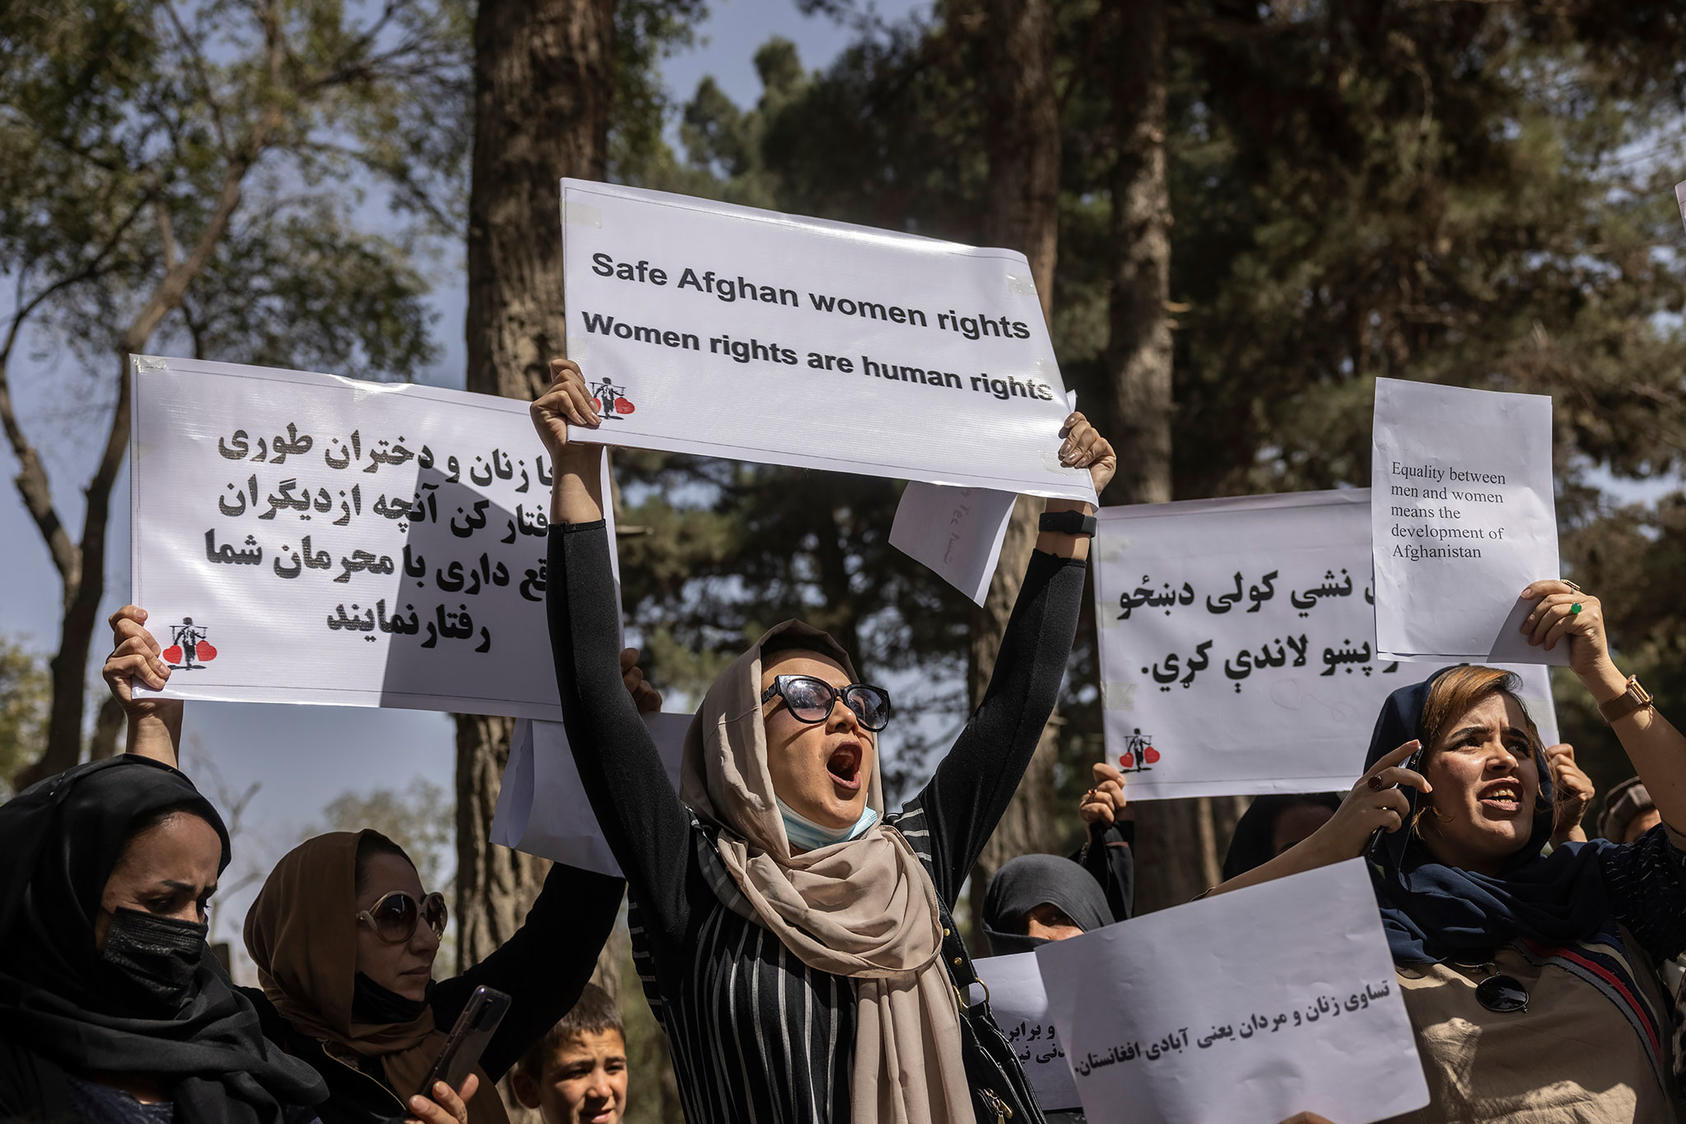 Afghan women protest for their rights under Taliban rule in Kabul, Afghanistan. October 10, 2021. (Victor J. Blue/The New York Times)